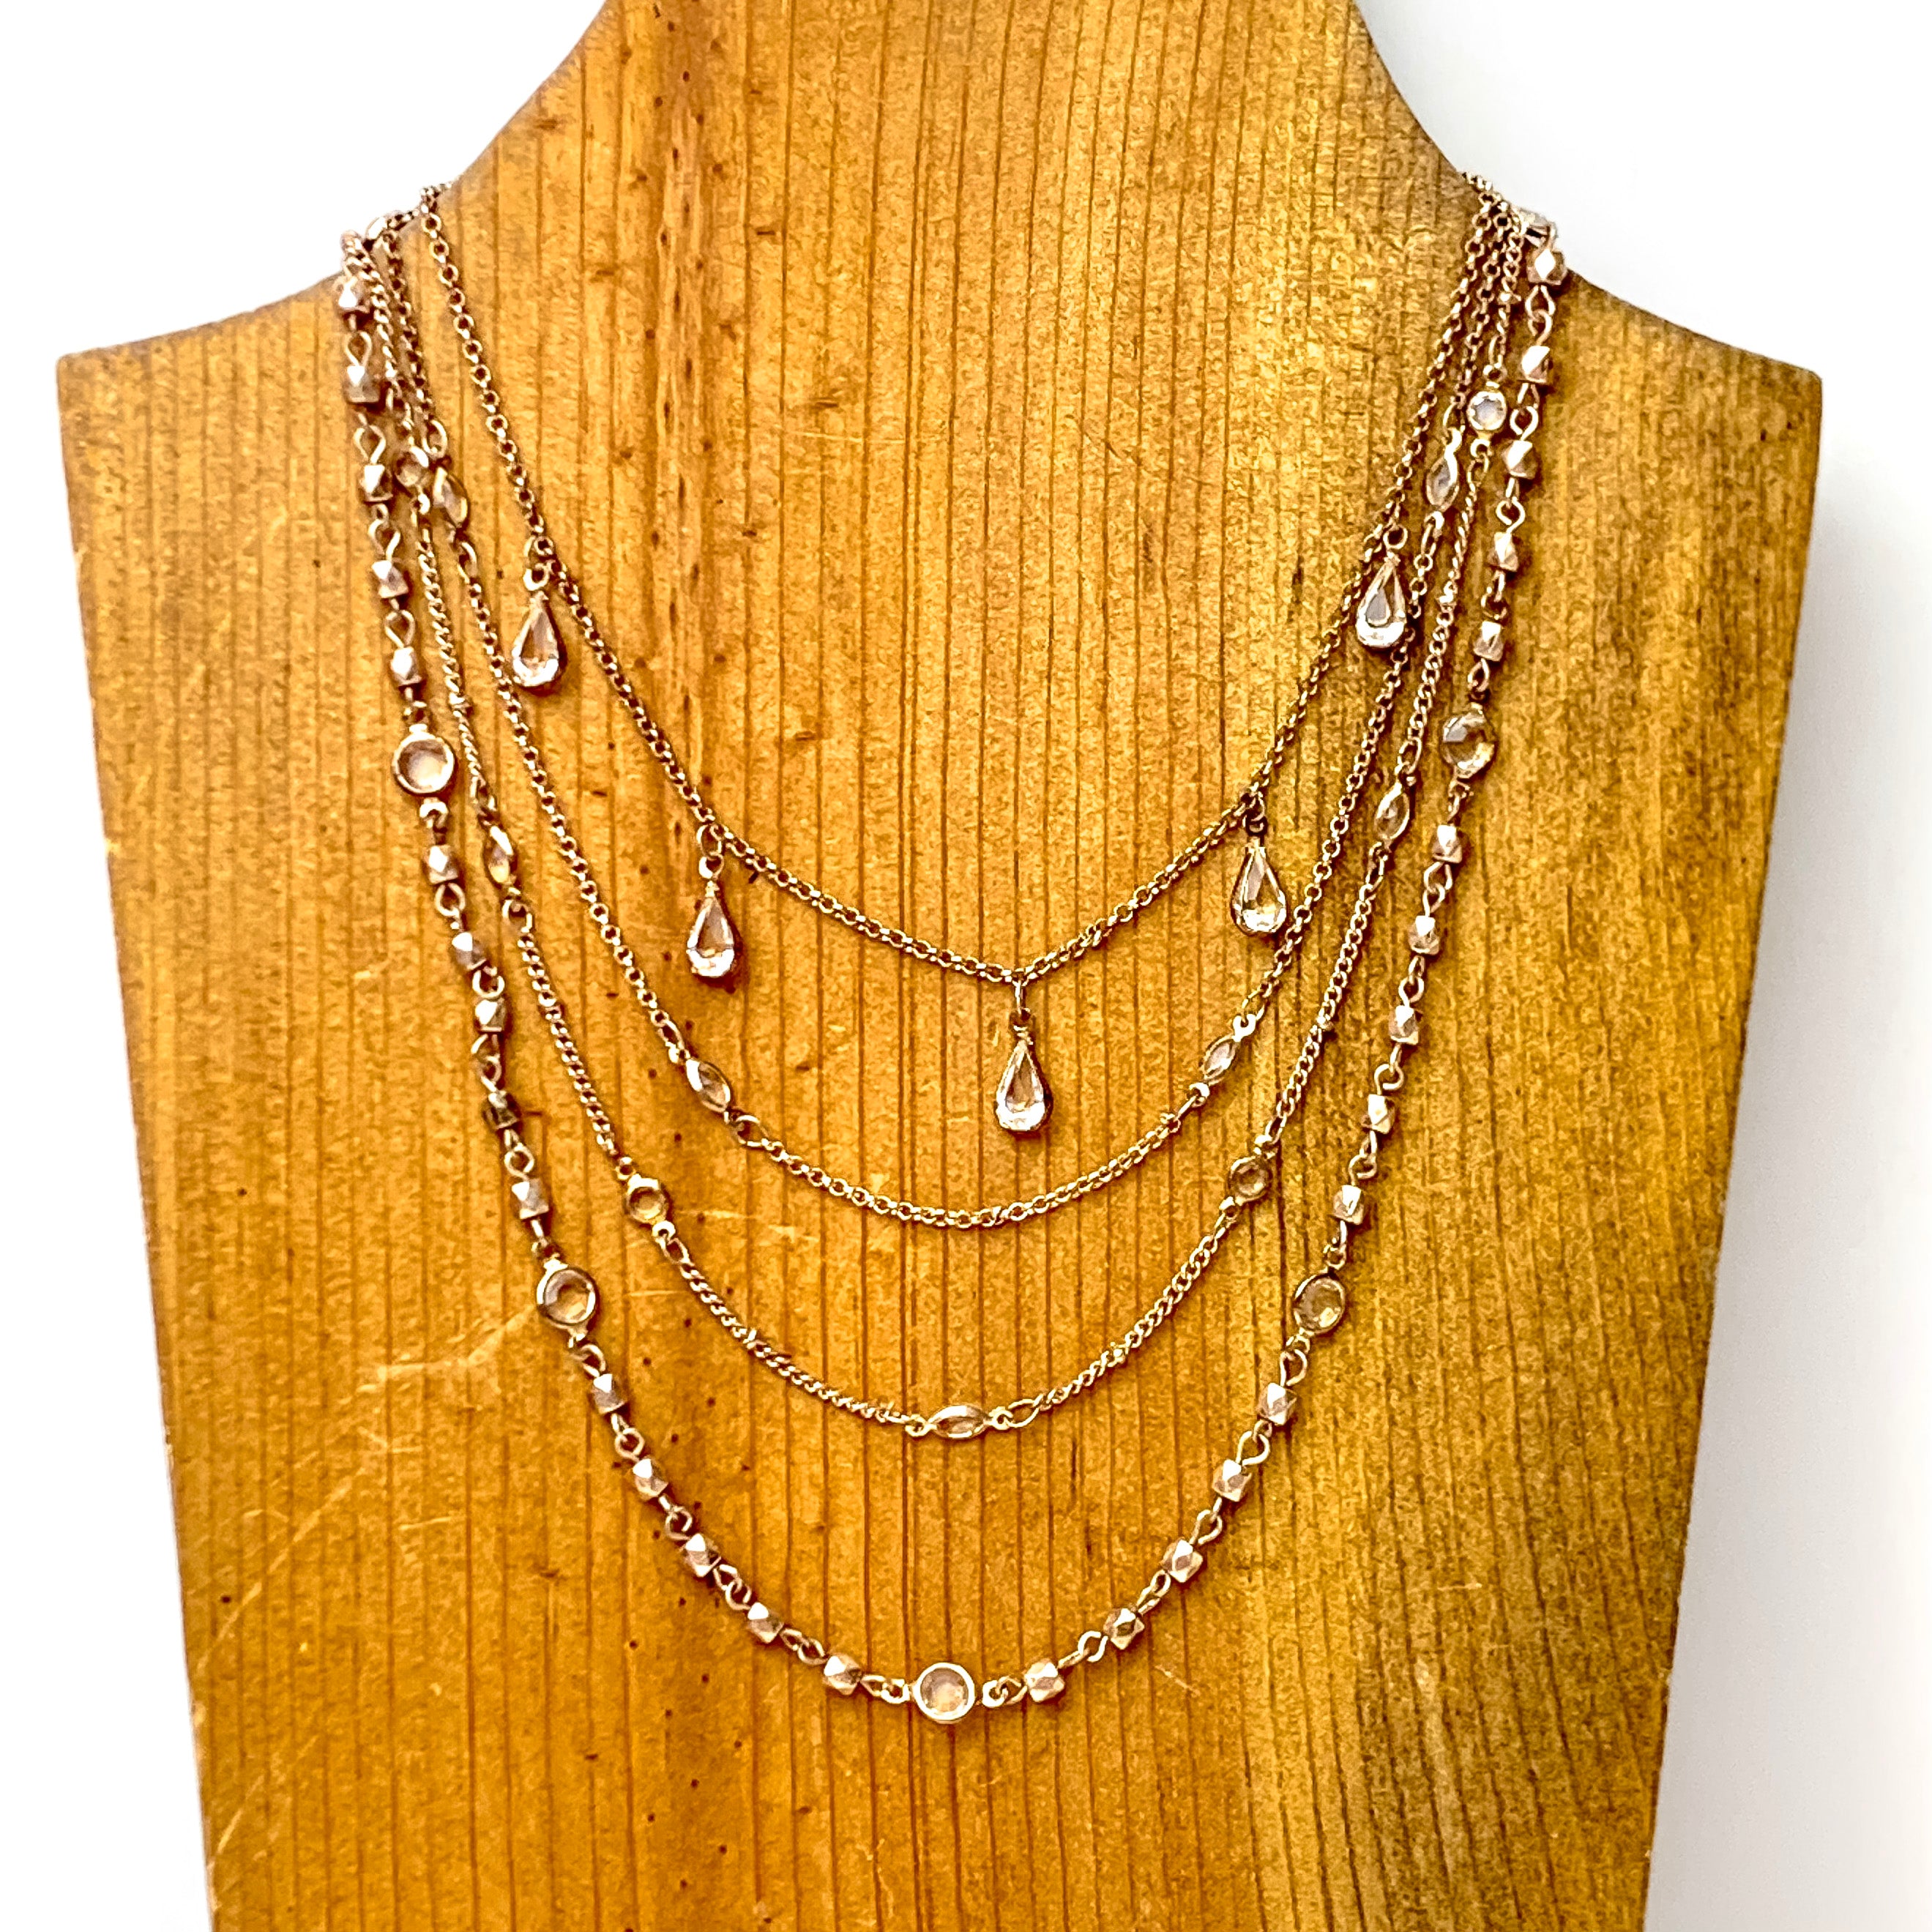 Multi Strand Rose Gold Tone Chain Necklace with Clear Crystal Accents - Giddy Up Glamour Boutique